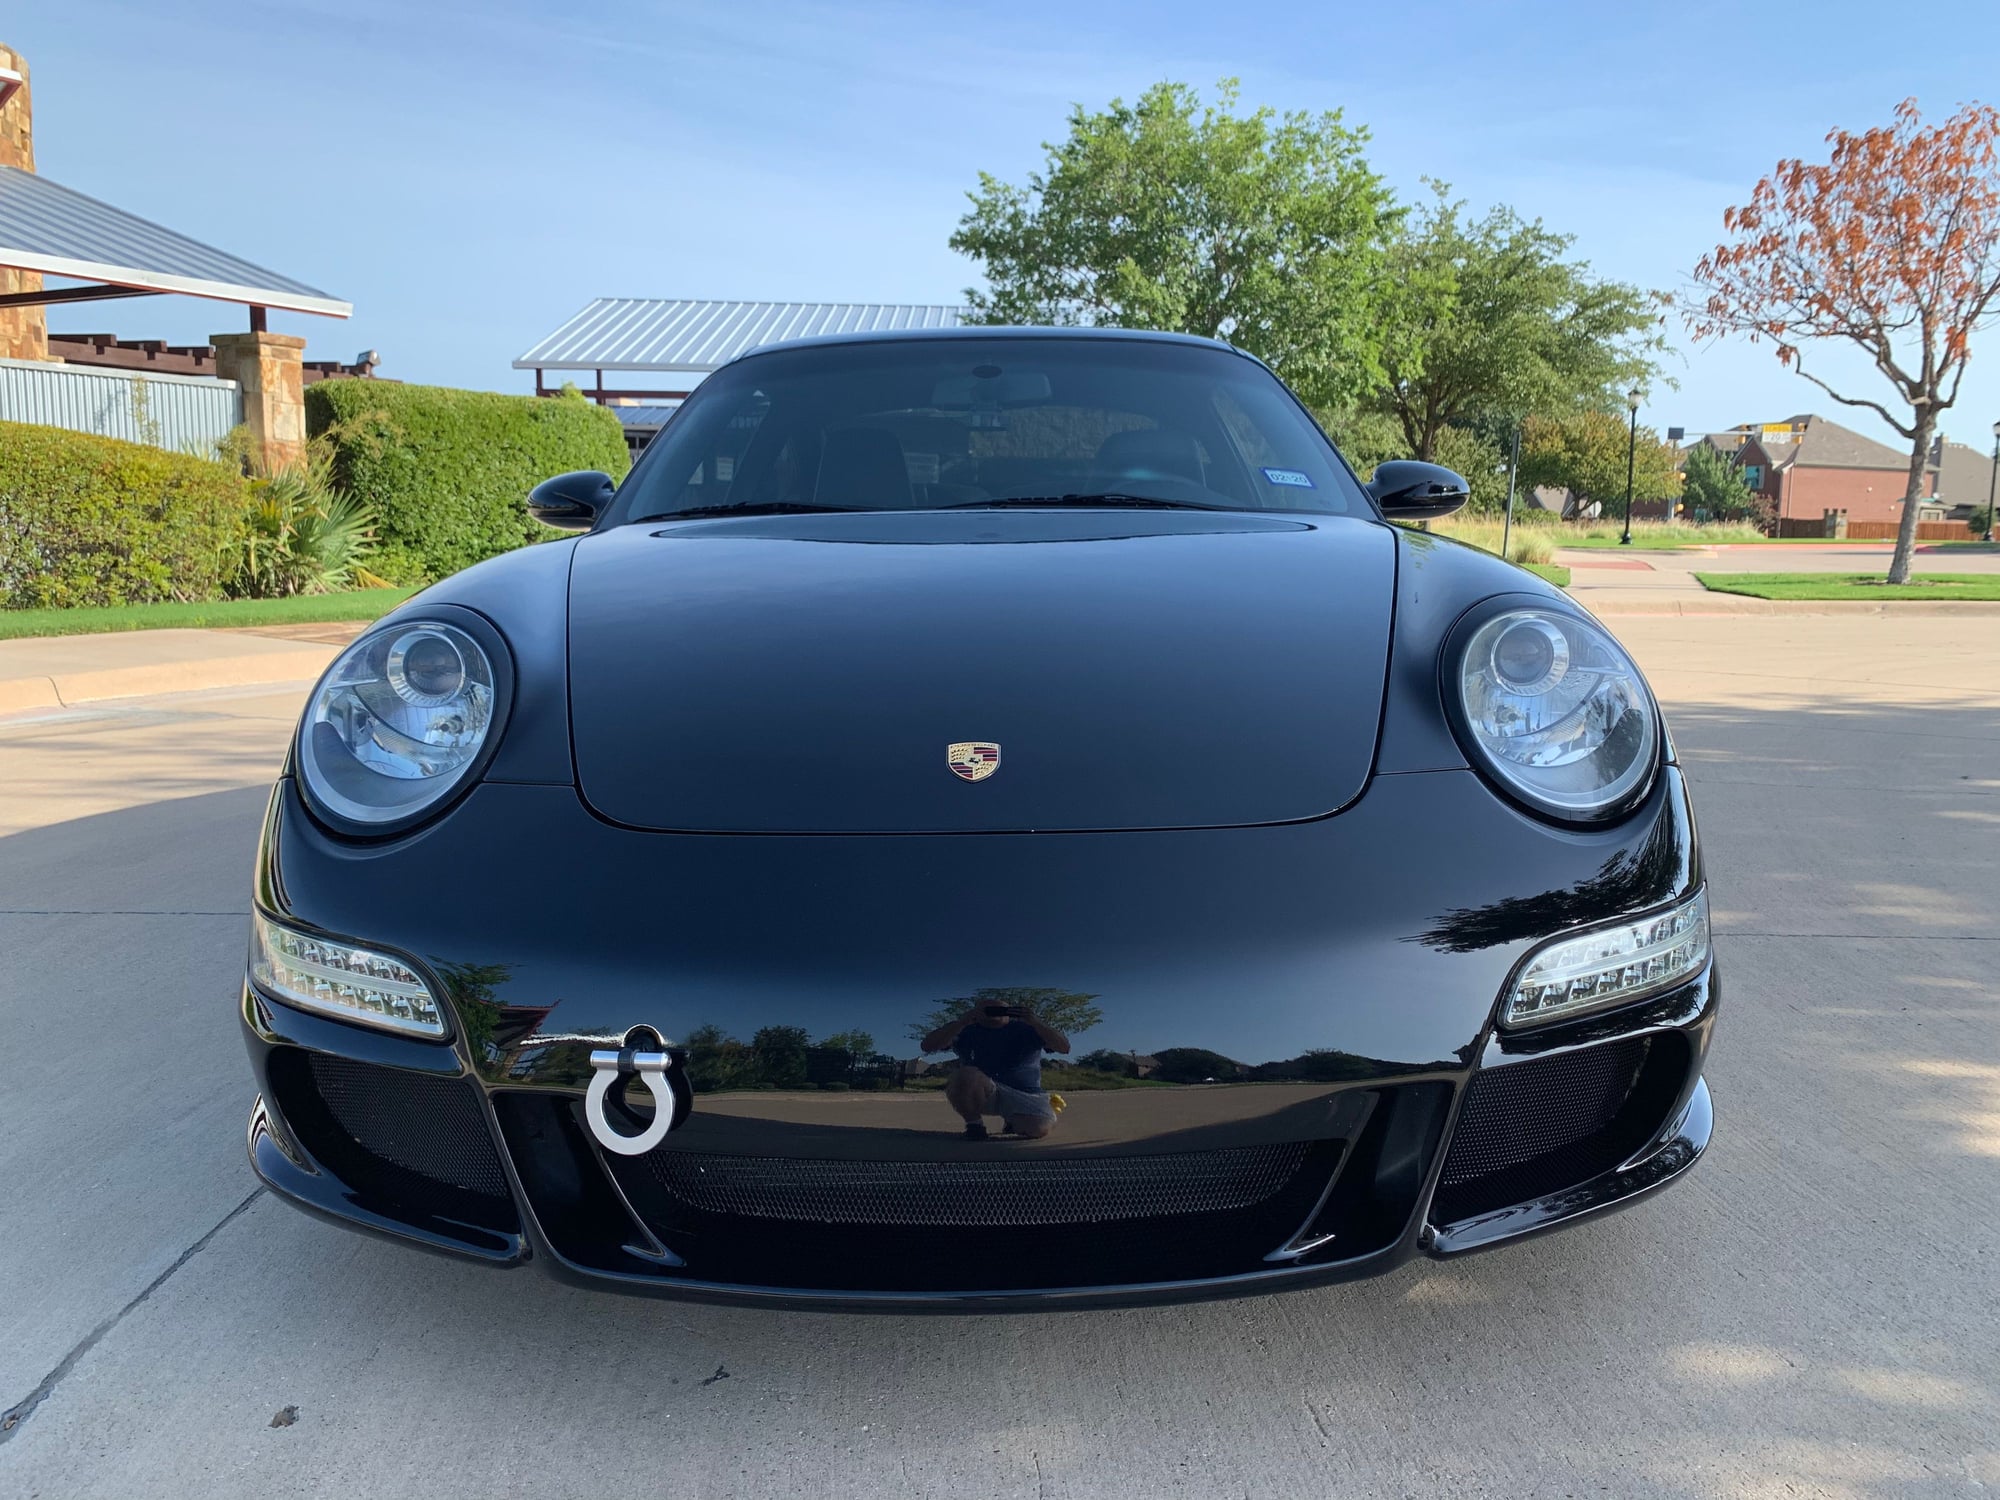 2005 Porsche 911 - 2005 911 C2 - Used - VIN WP0AA29985S715845 - 82,592 Miles - 6 cyl - 2WD - Manual - Coupe - Black - Fort Worth, TX 76244, United States